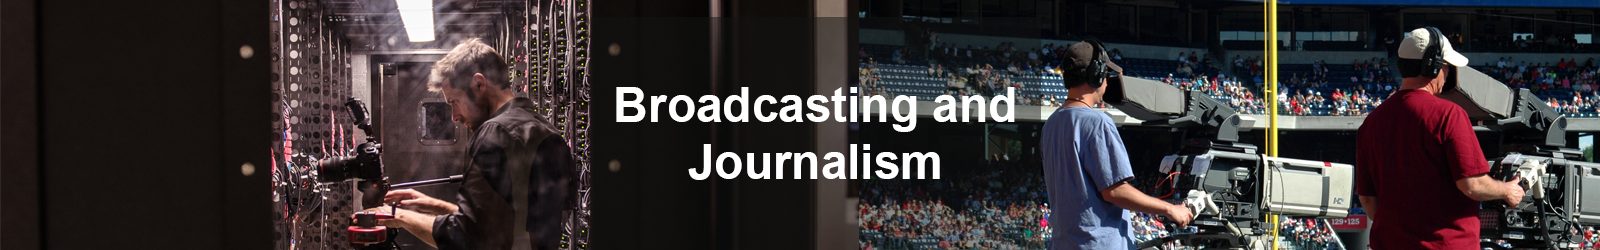 Broadcasting and Journalism